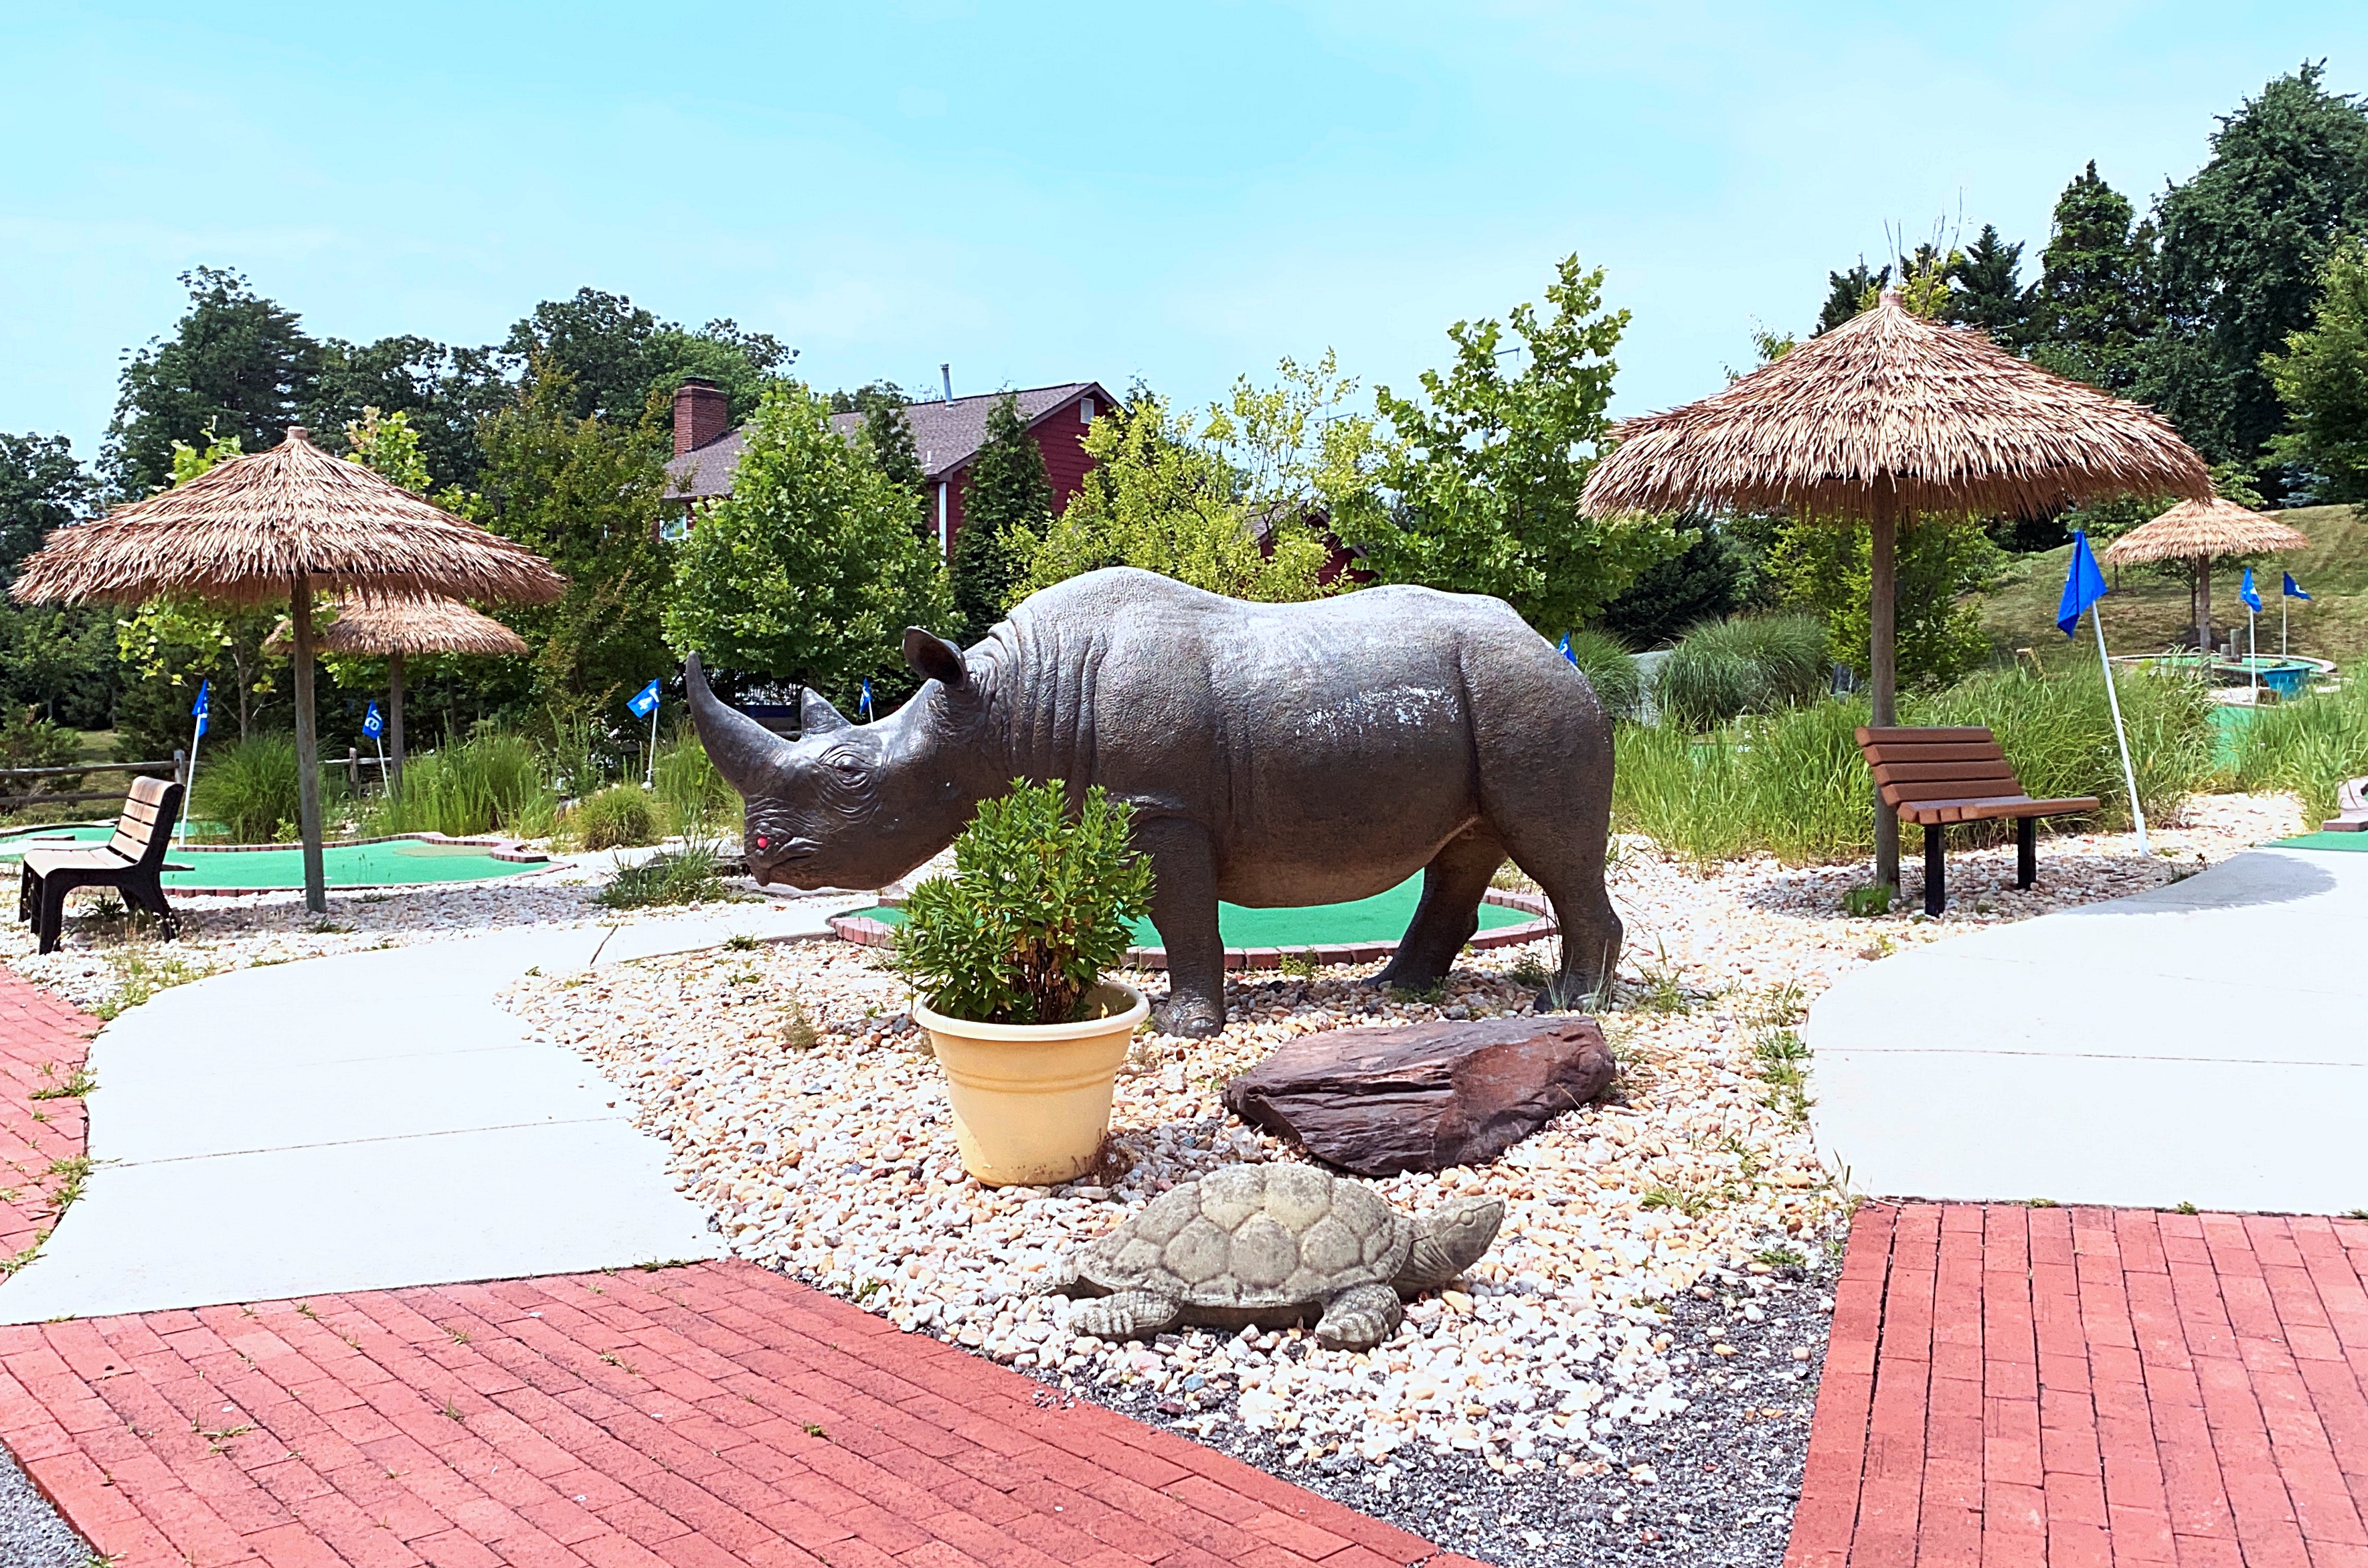 Miniature golf course with statue of rhino. 